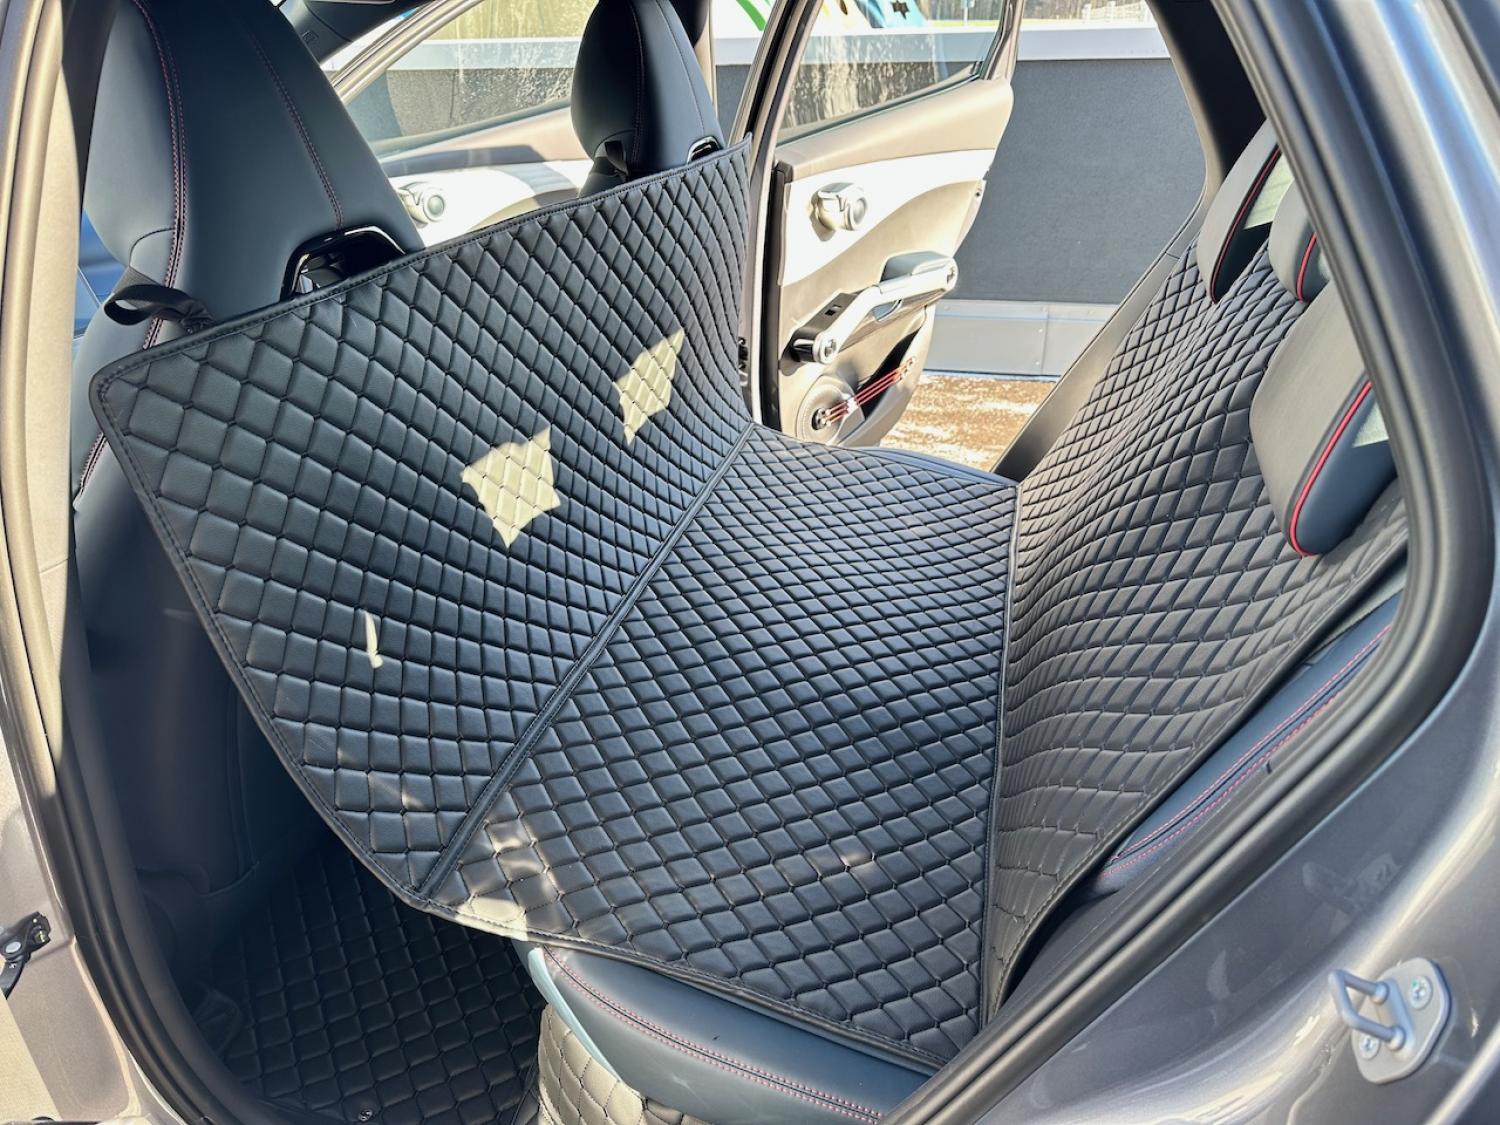 CARSTYLER® Back Seat Cover Geeignet Für Ford Exploer 6. Generation 2019-heute